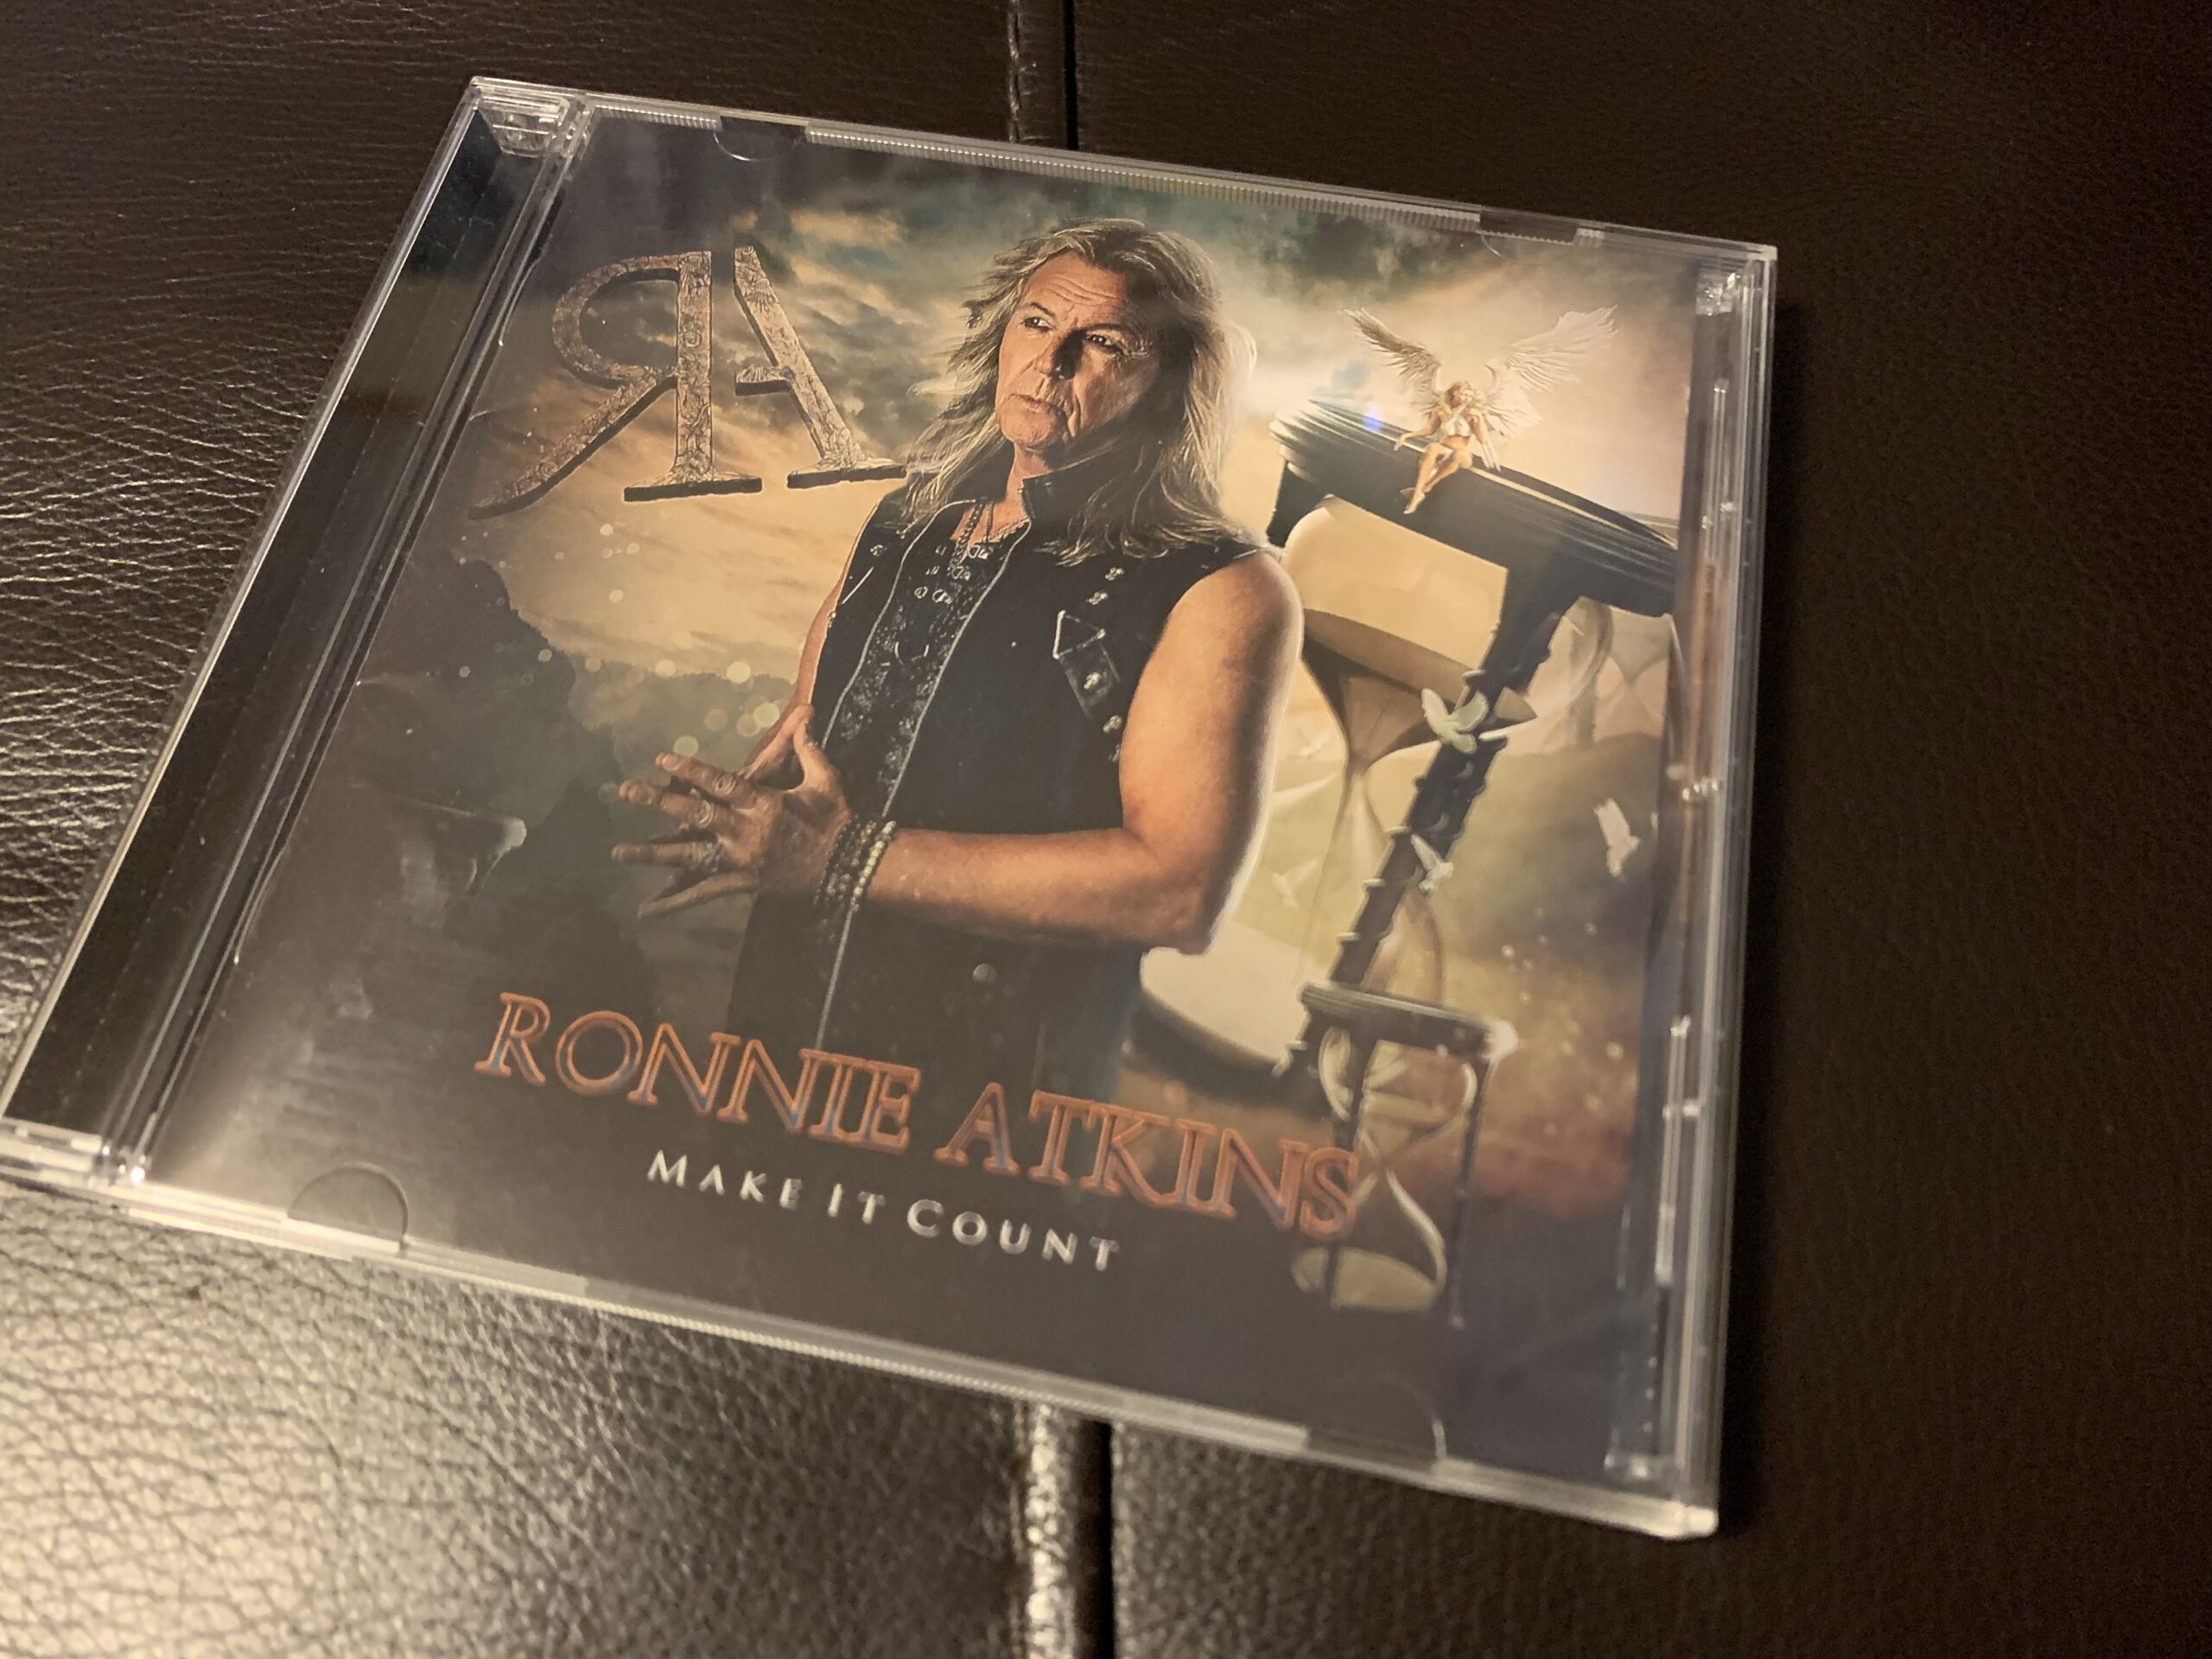 Ronnie Atkinsの2ndソロアルバム『Make It Count』が素晴らしい